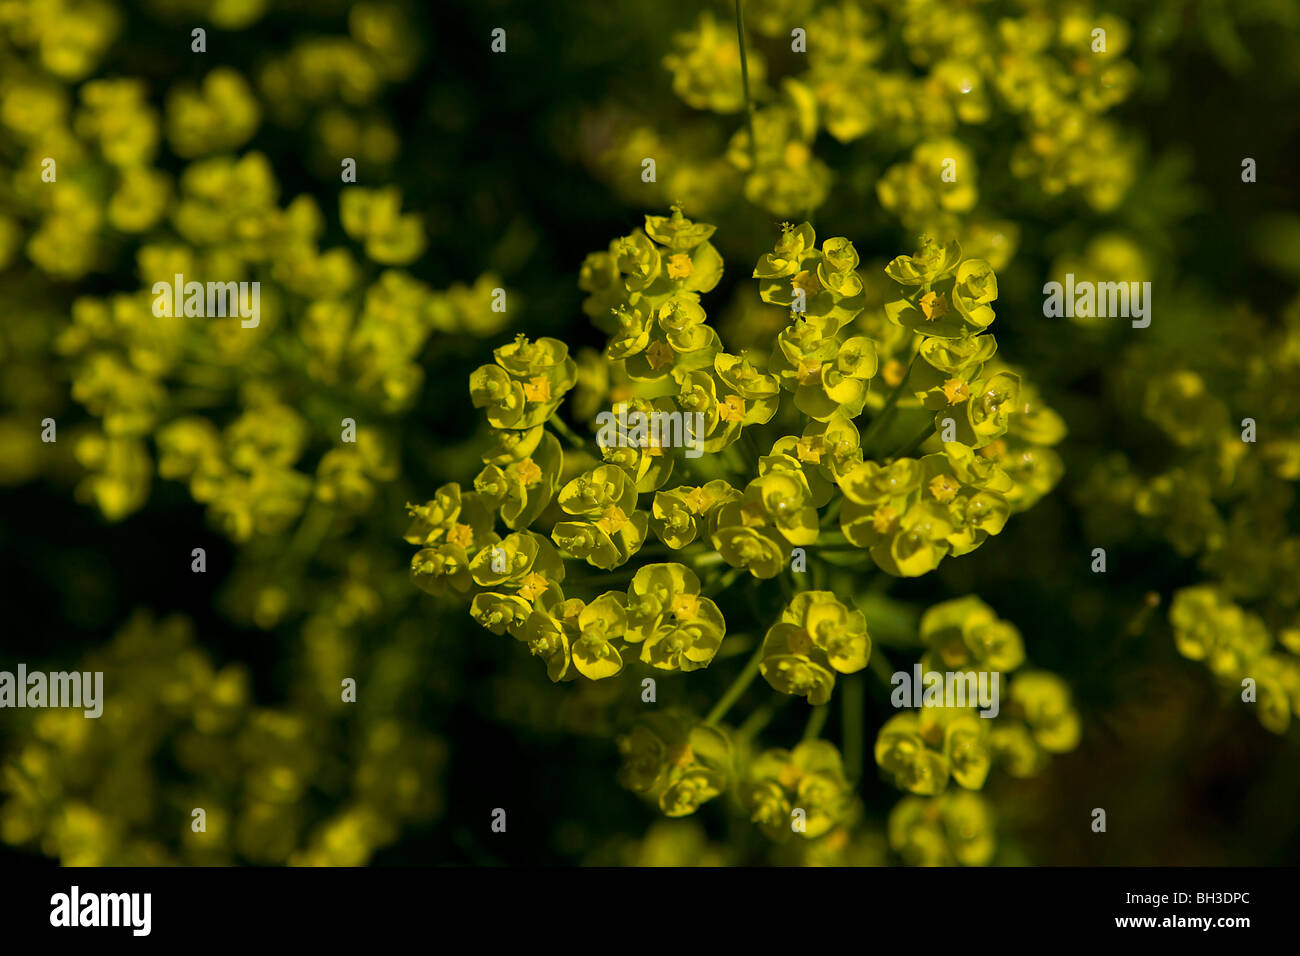 Close-up of euphorbia or spurge celebrating its amazing Chartreusey-yellow flower bracts. Stock Photo